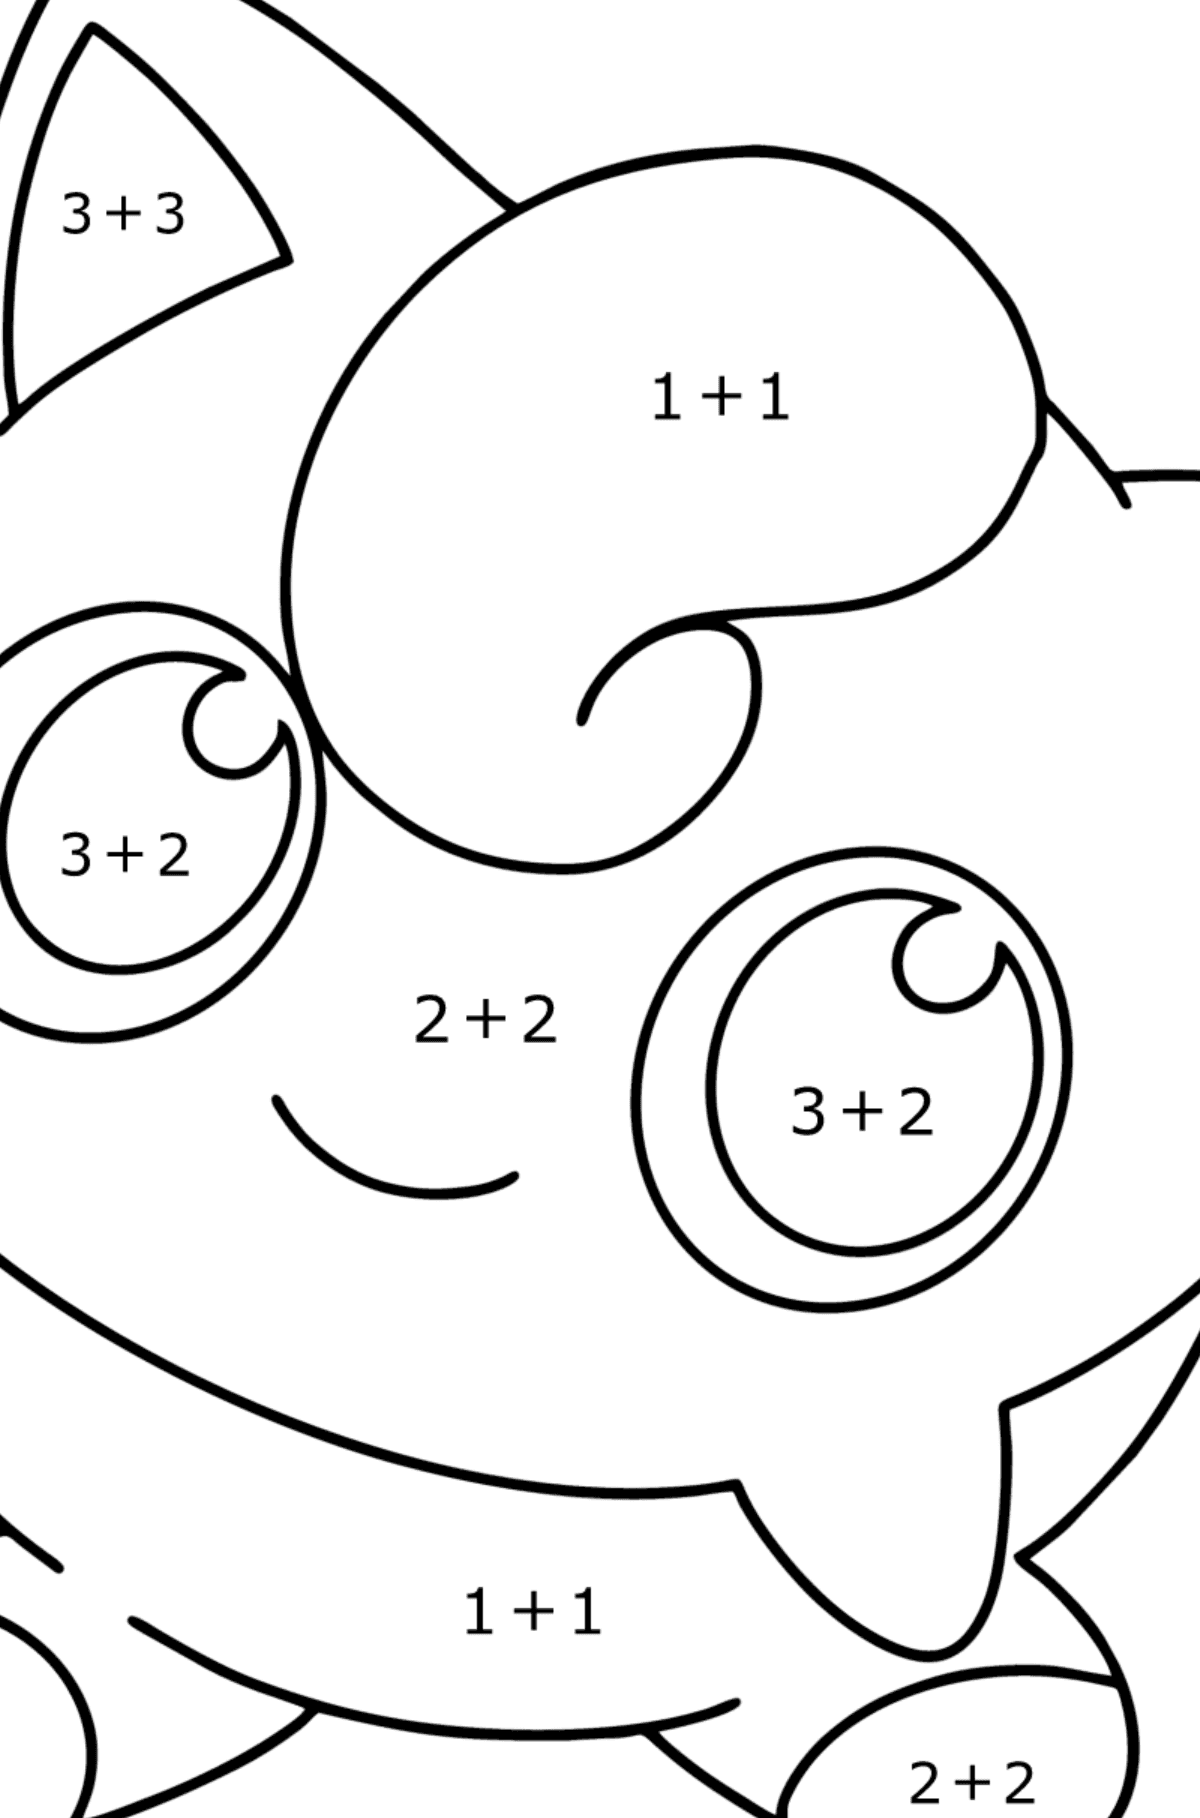 Coloring page Pokémon Go Jigglypuff - Math Coloring - Addition for Kids